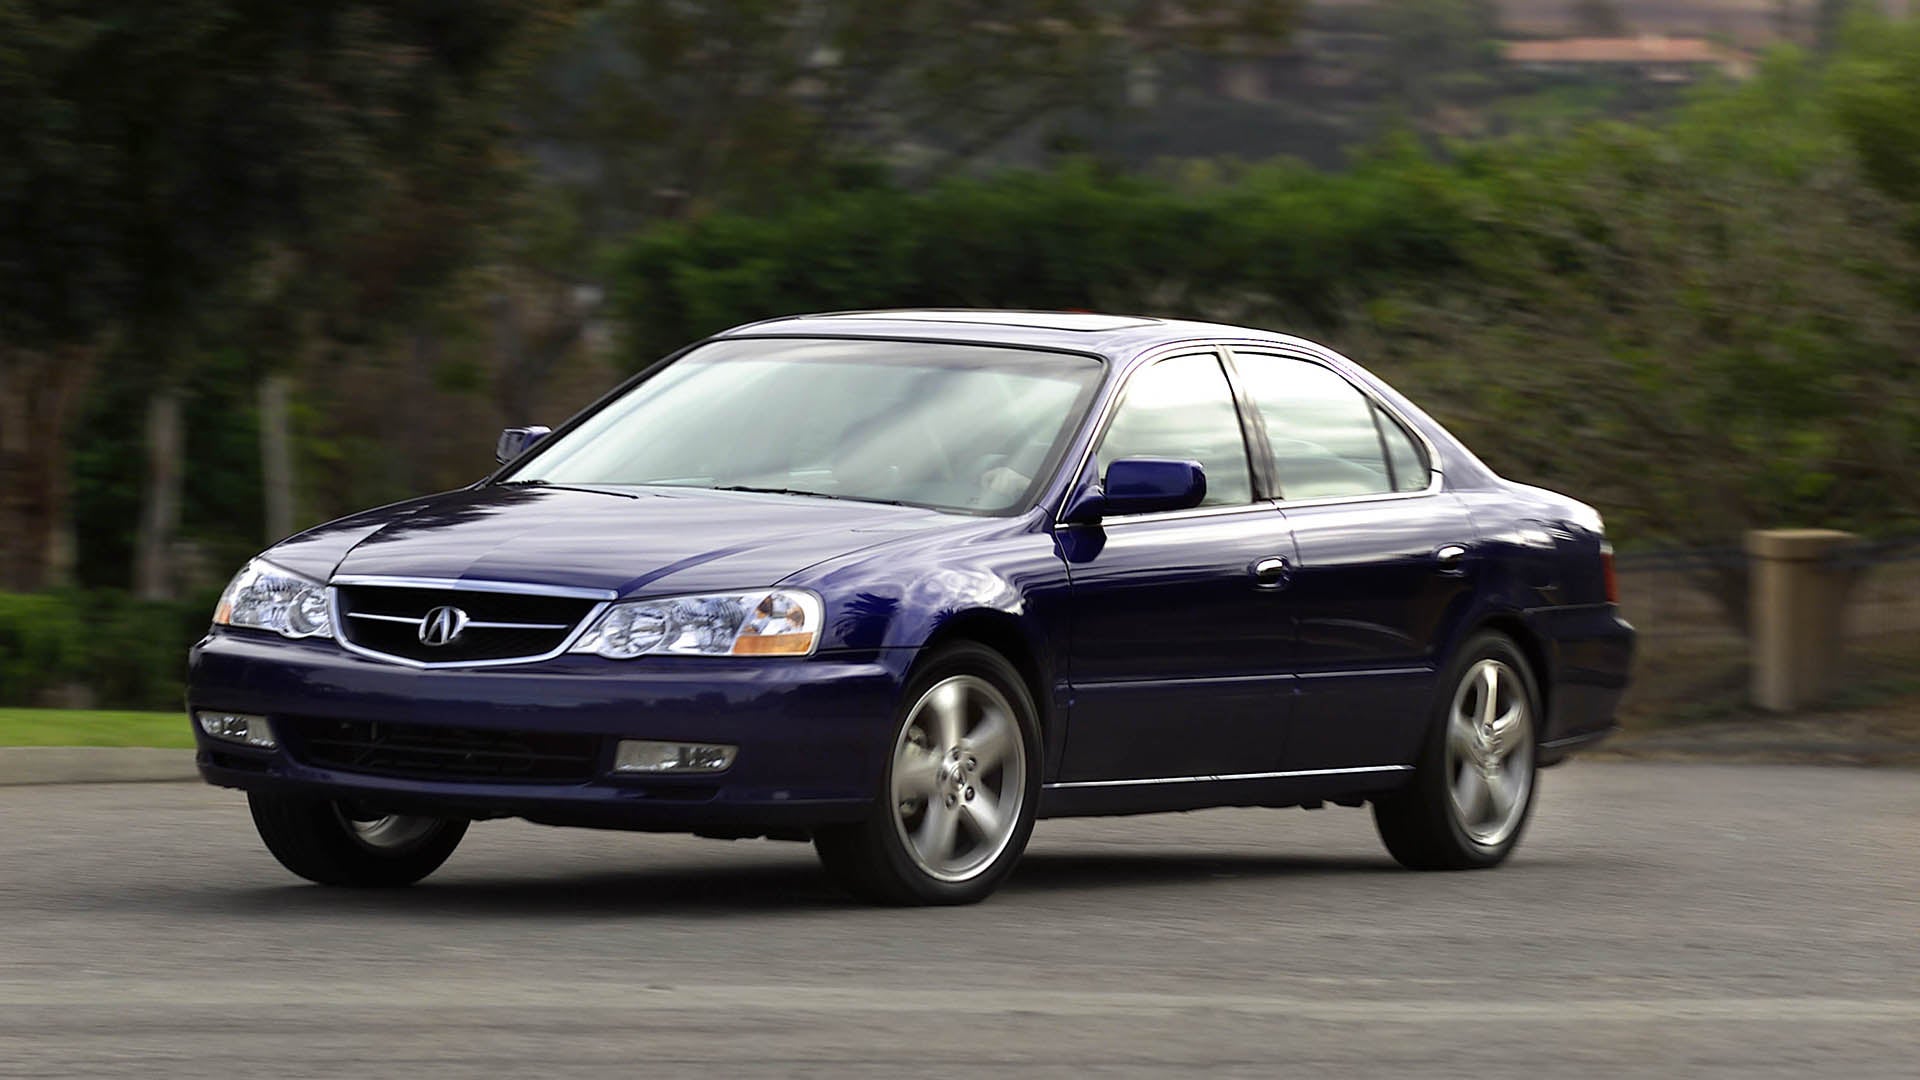 <p class="caption-title">2002-2003 3.2 TL Type S</p>, The TL Type S first arrived for 2002-2003, then later appeared for 2007-2008., <i>Acura</i>